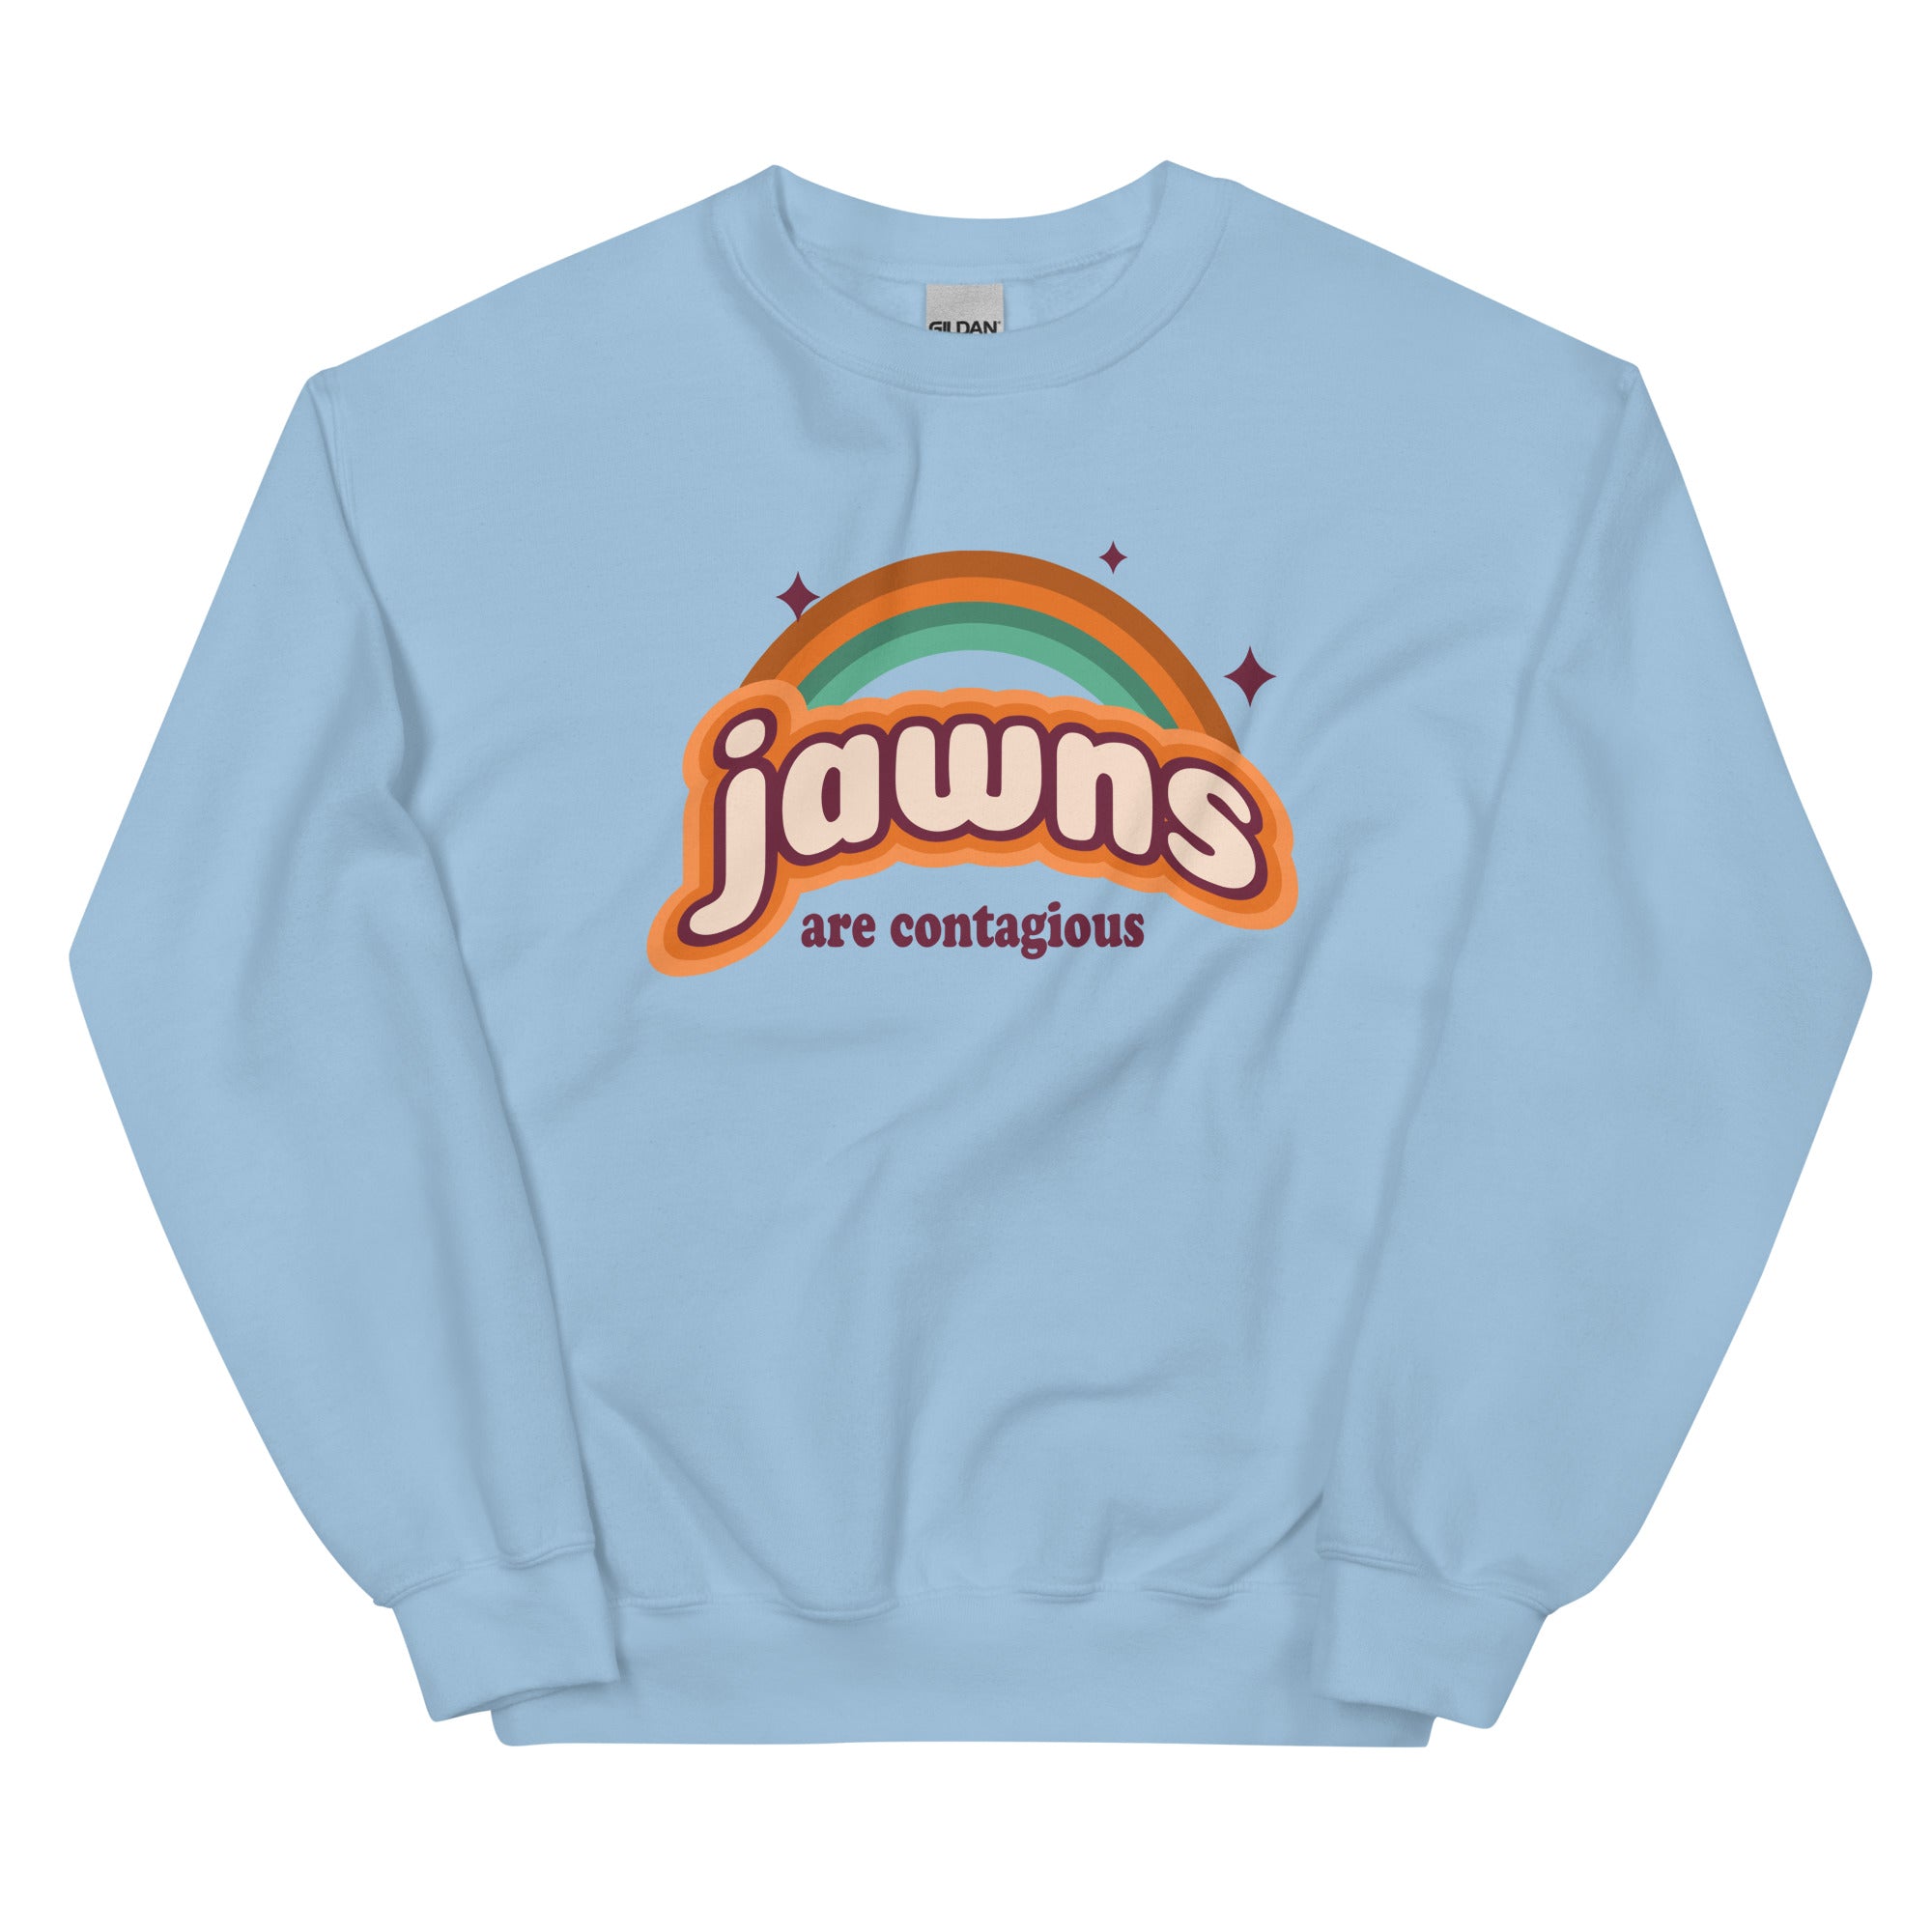 "Jawns Are Contagious" Sweatshirt